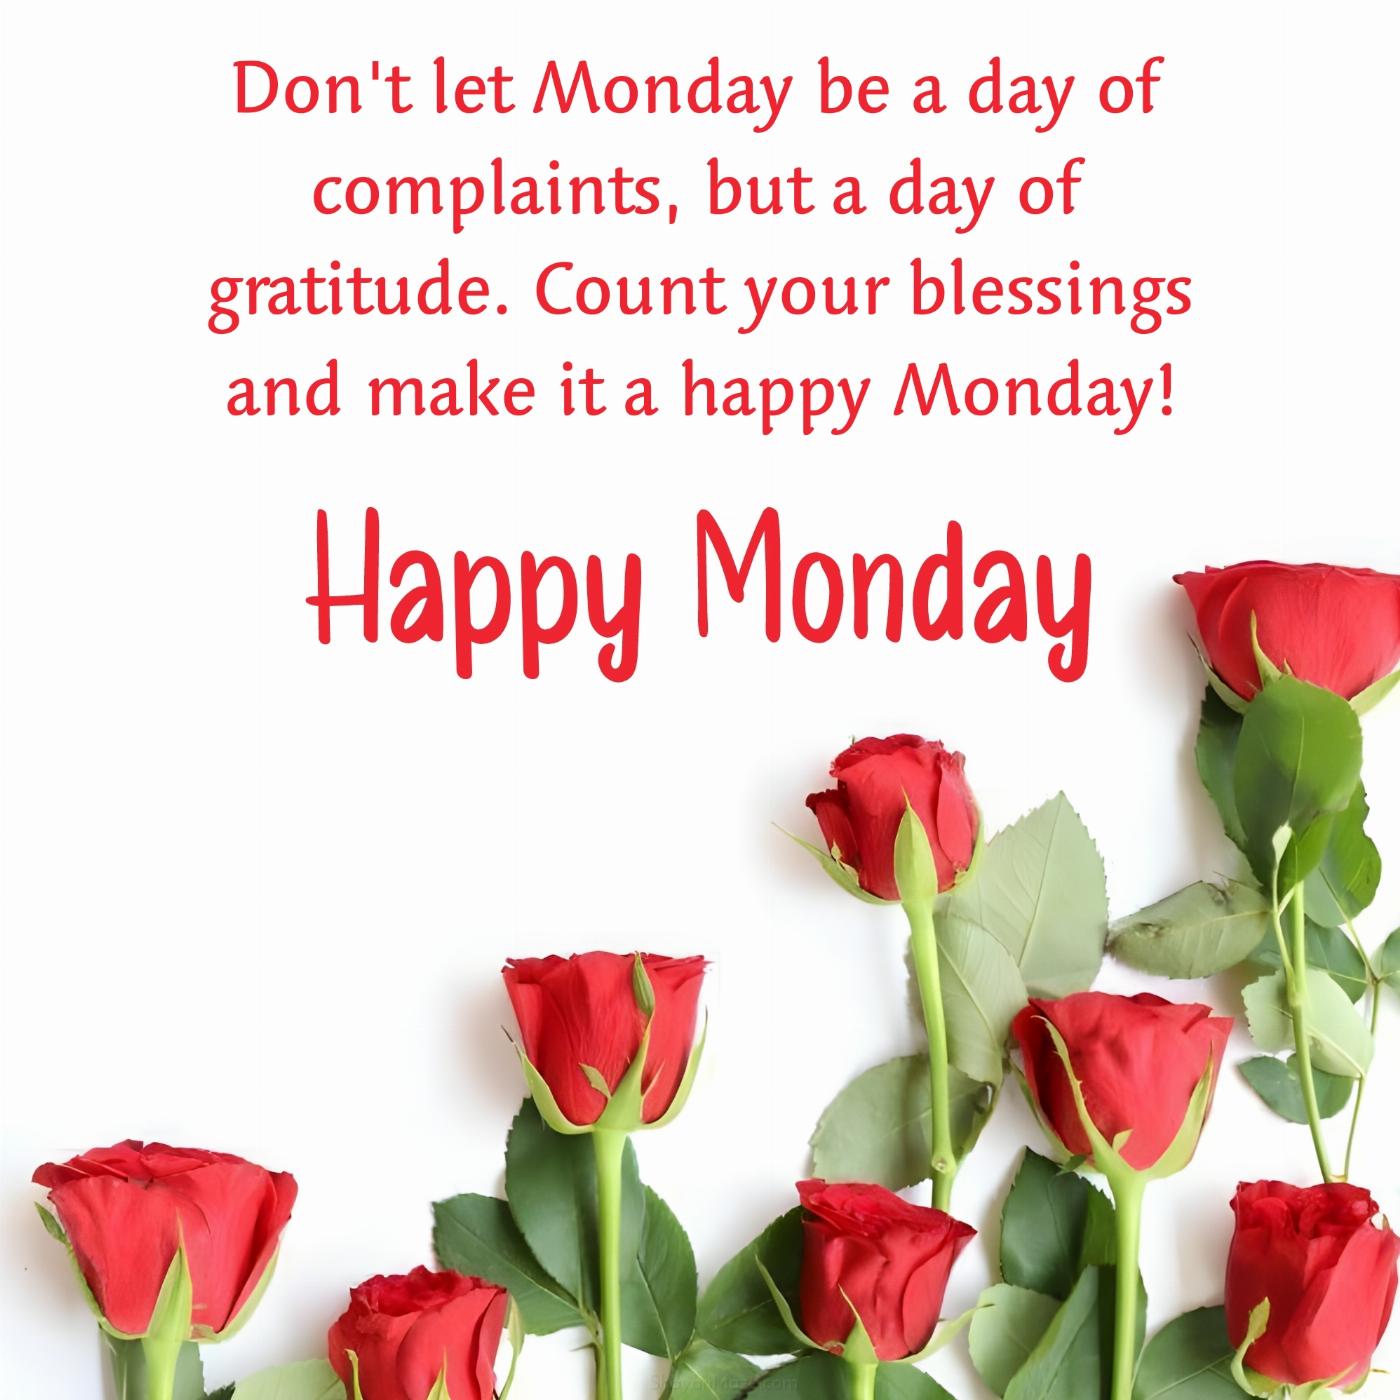 Don't let Monday be a day of complaints but a day of gratitude